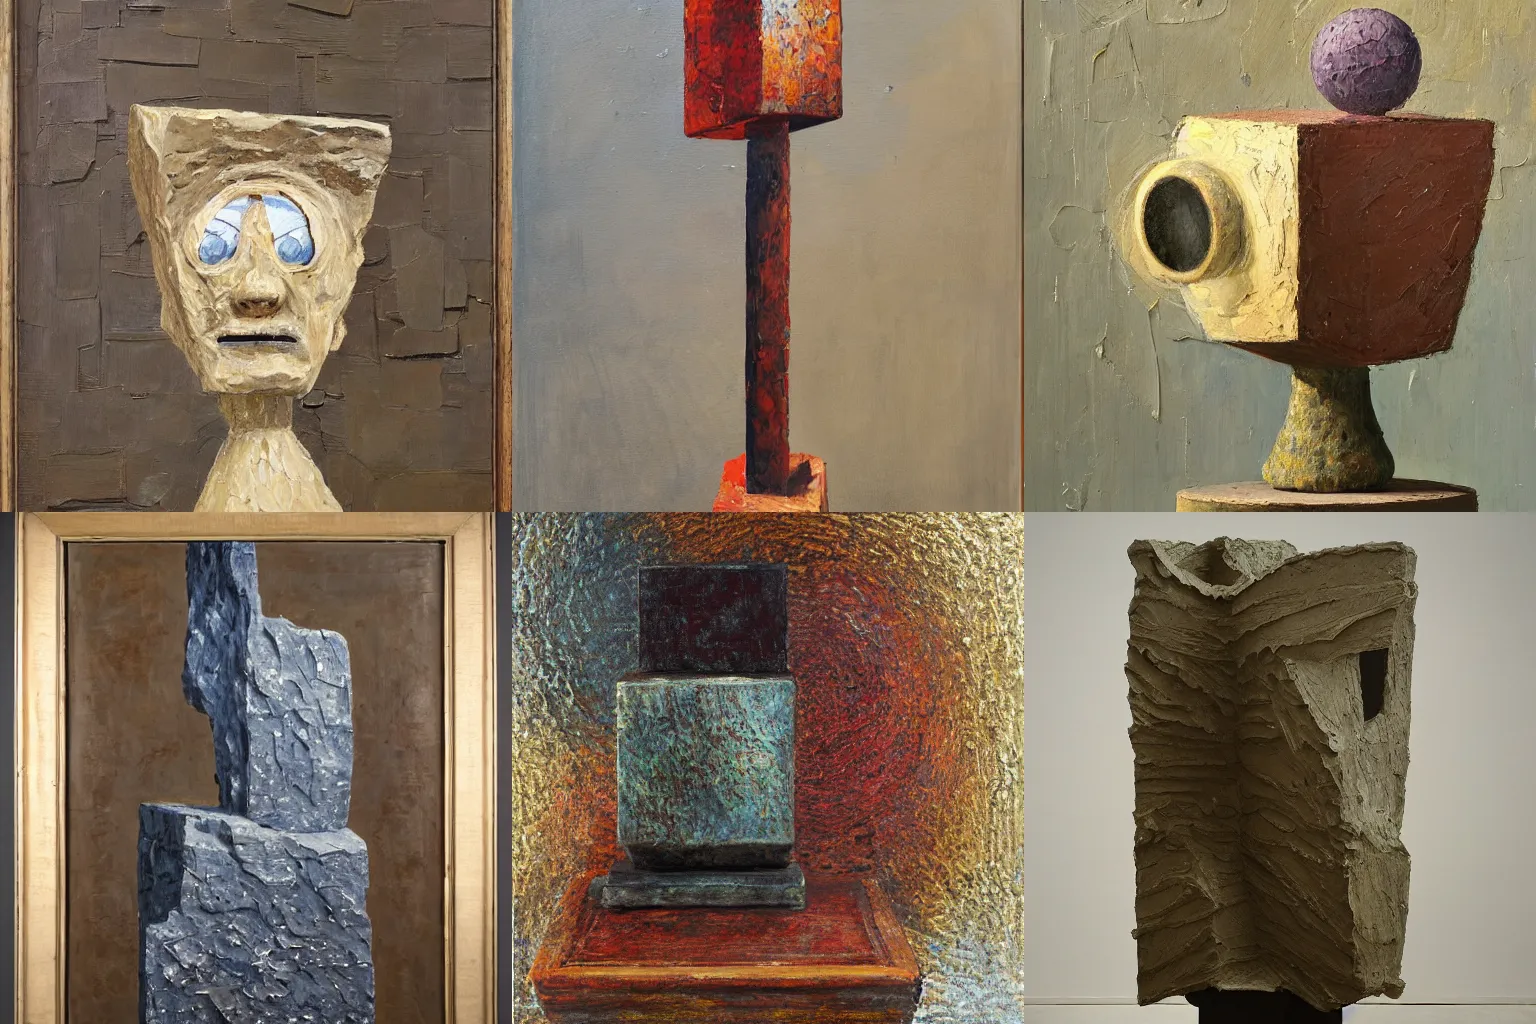 Prompt: a detailed, impasto painting by shaun tan and louise bourgeois of an abstract forgotten sculpture on a pedestal by ivan seal and the caretaker